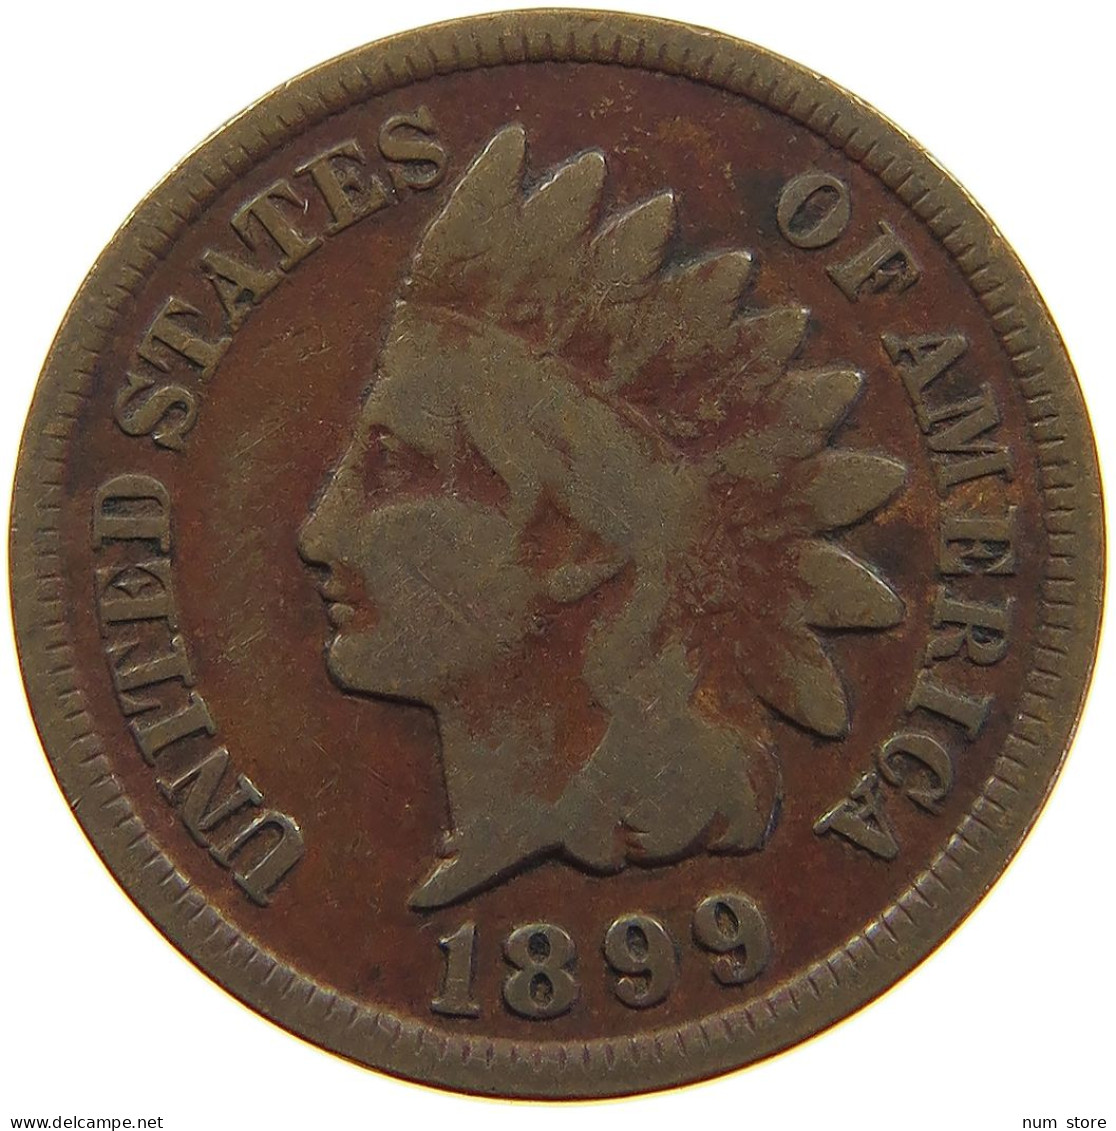 UNITED STATES OF AMERICA CENT 1899 INDIAN HEAD #a063 0199 - 1859-1909: Indian Head